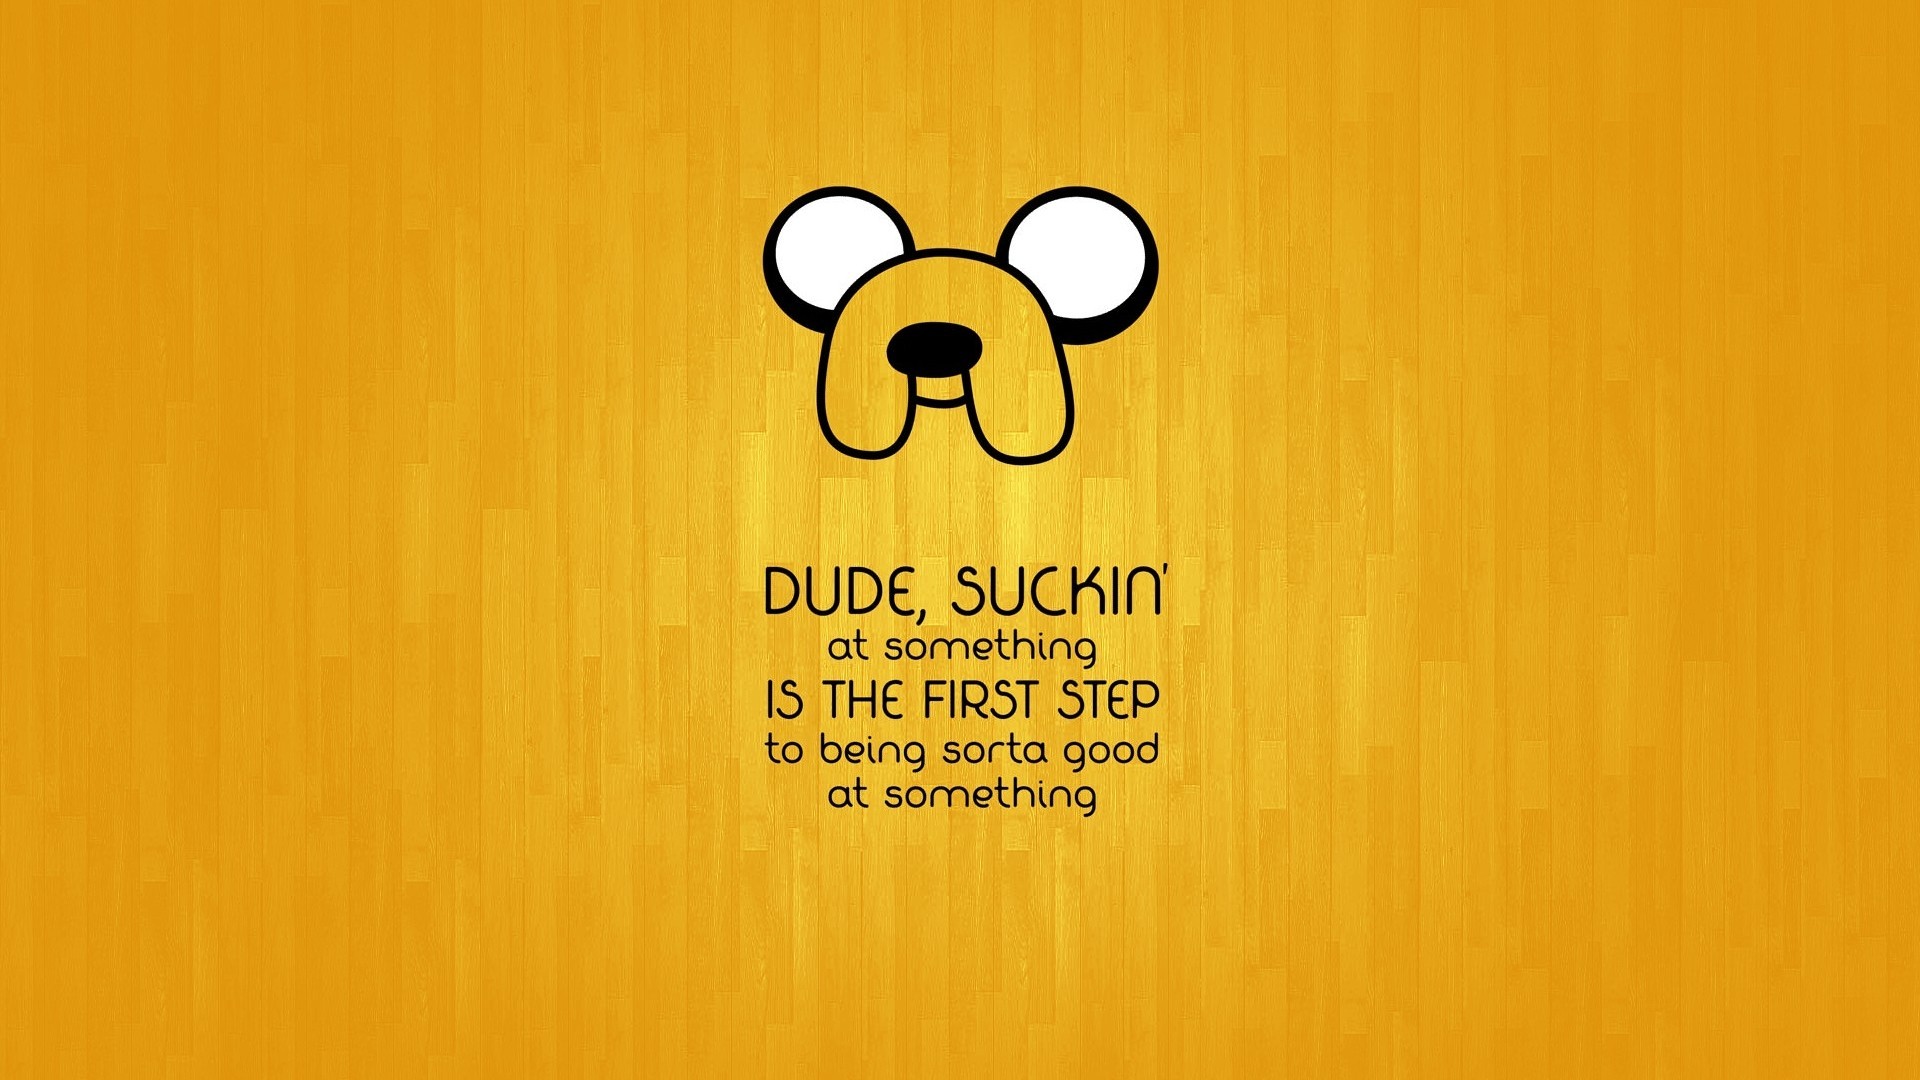 Wallpaper, illustration, quote, anime, text, logo, yellow, cartoon, graphic design, brand, Adventure Time, Jake the Dog, line, graphics, 1920x1080 px, computer wallpaper, font 1920x1080